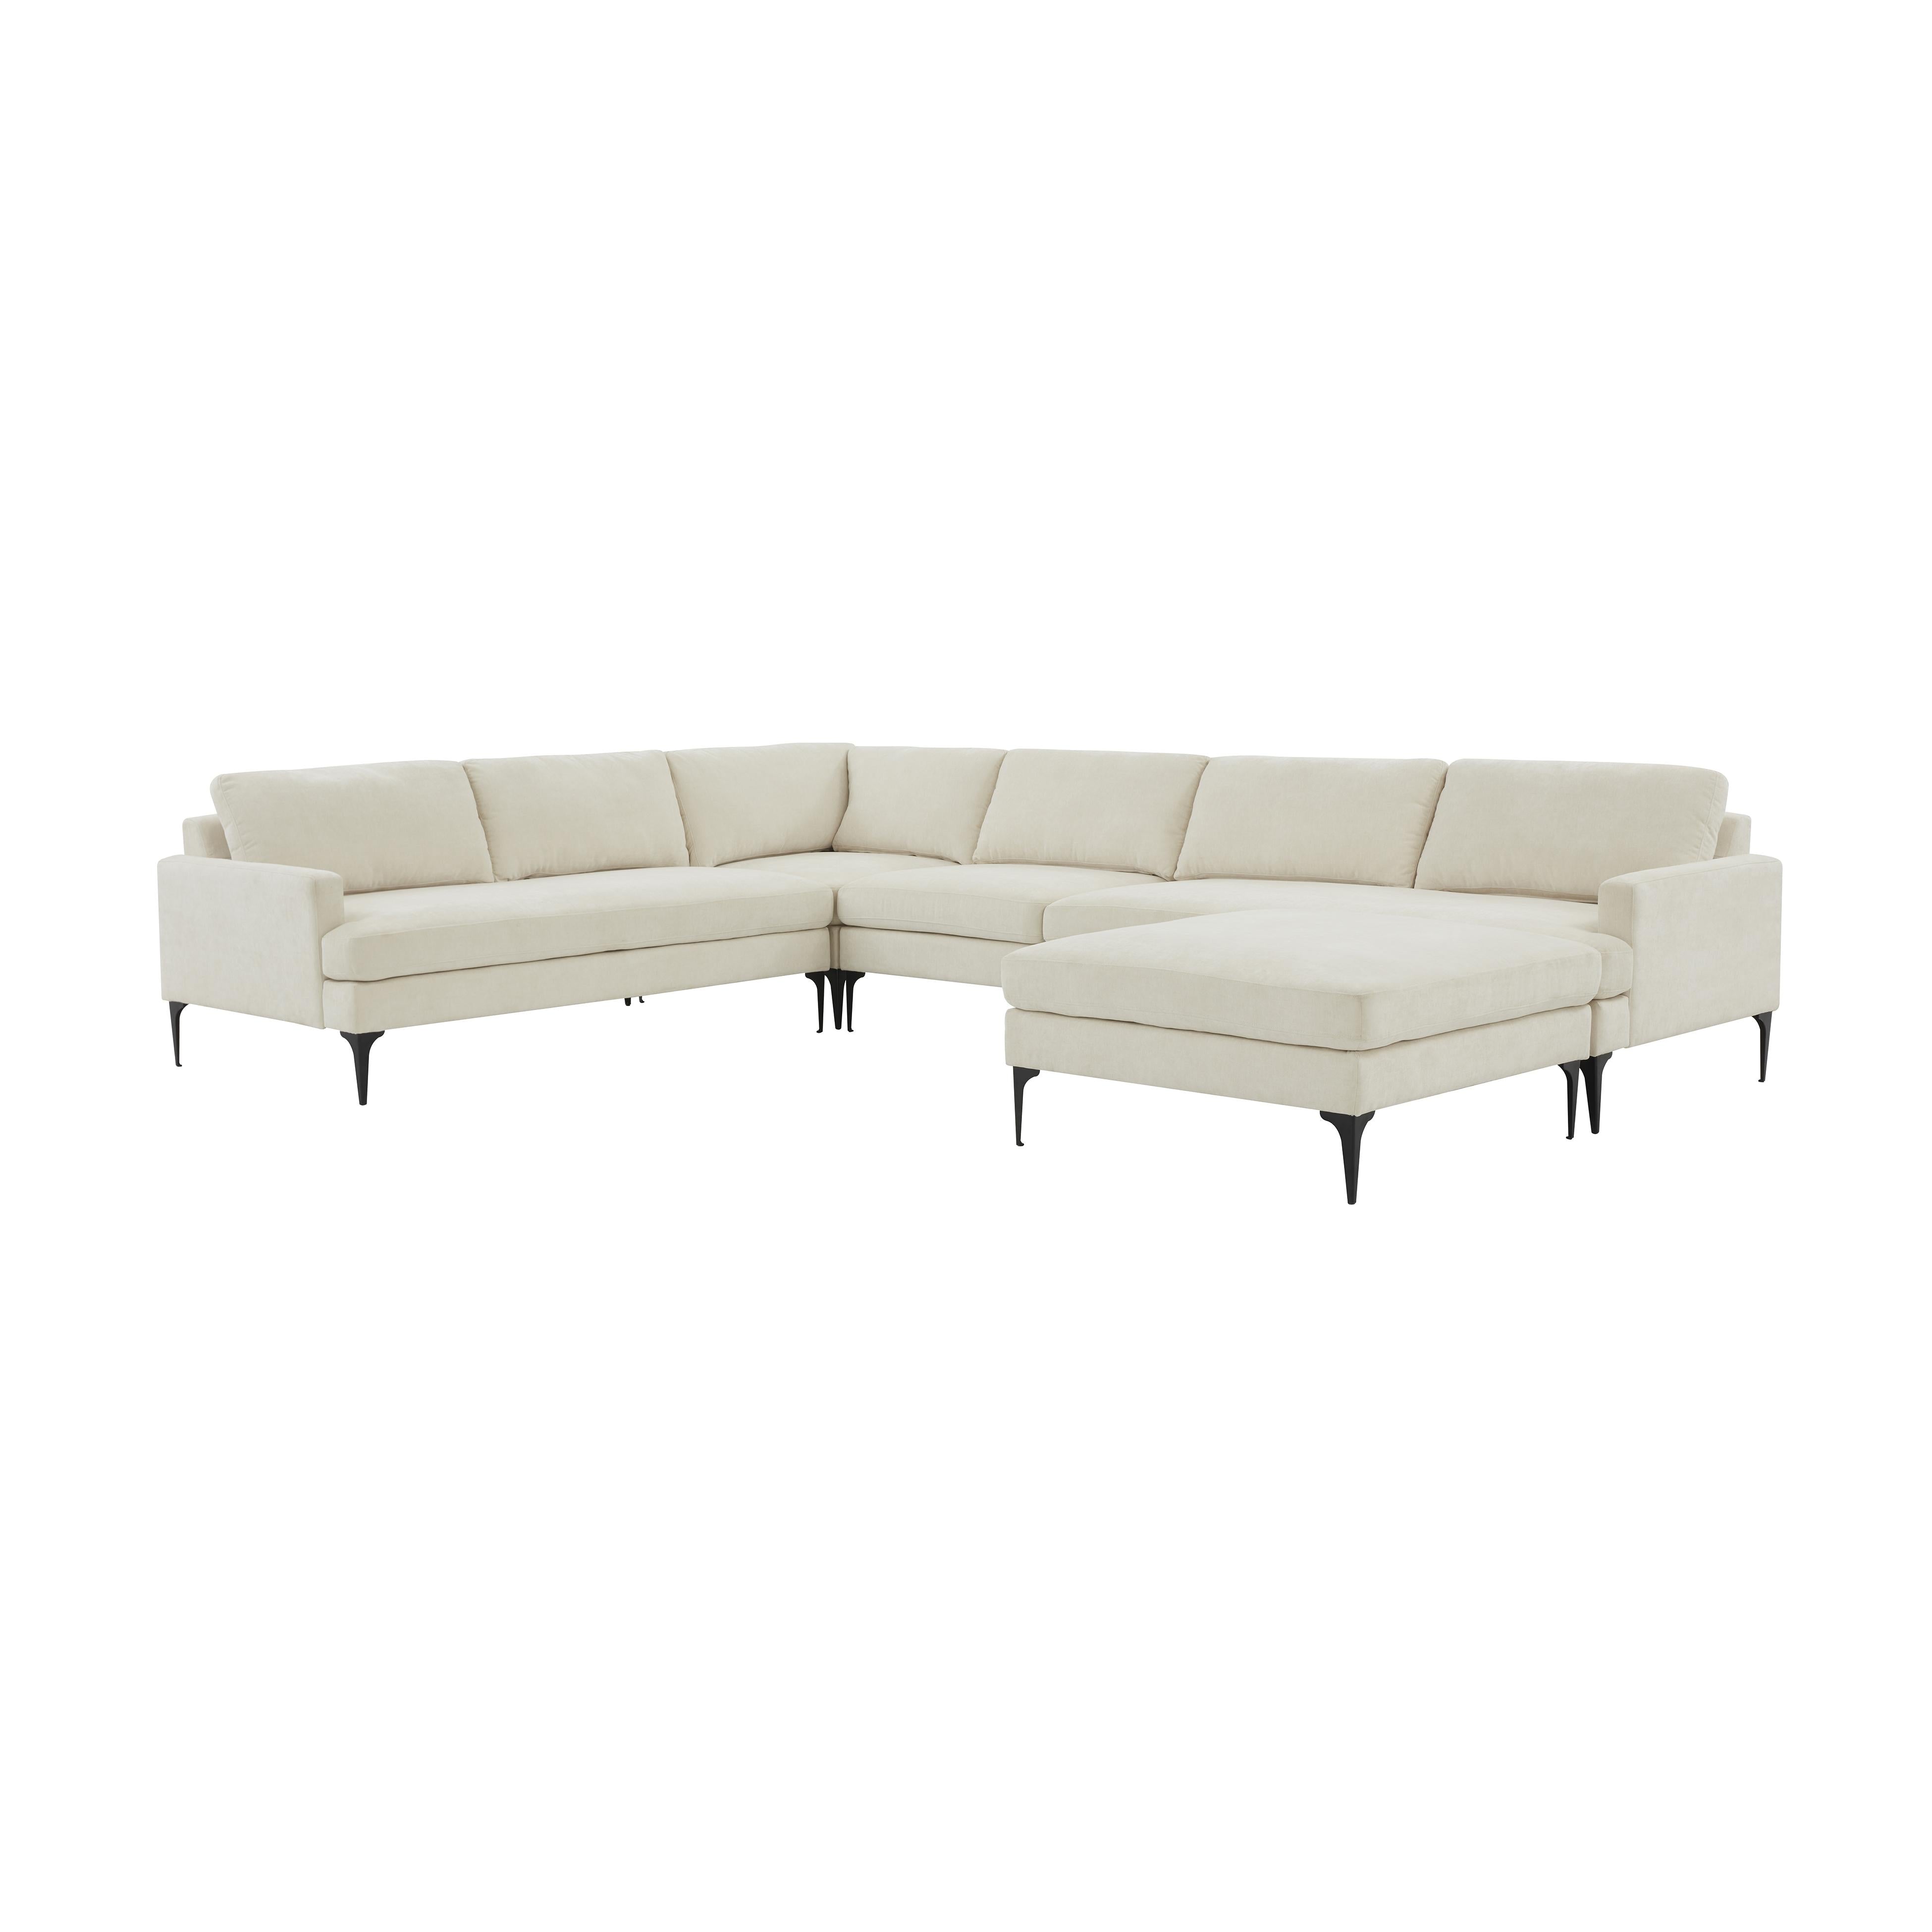 Tov Furniture Sectionals - Serena Cream Velvet Large Chaise Sectional with Black Legs